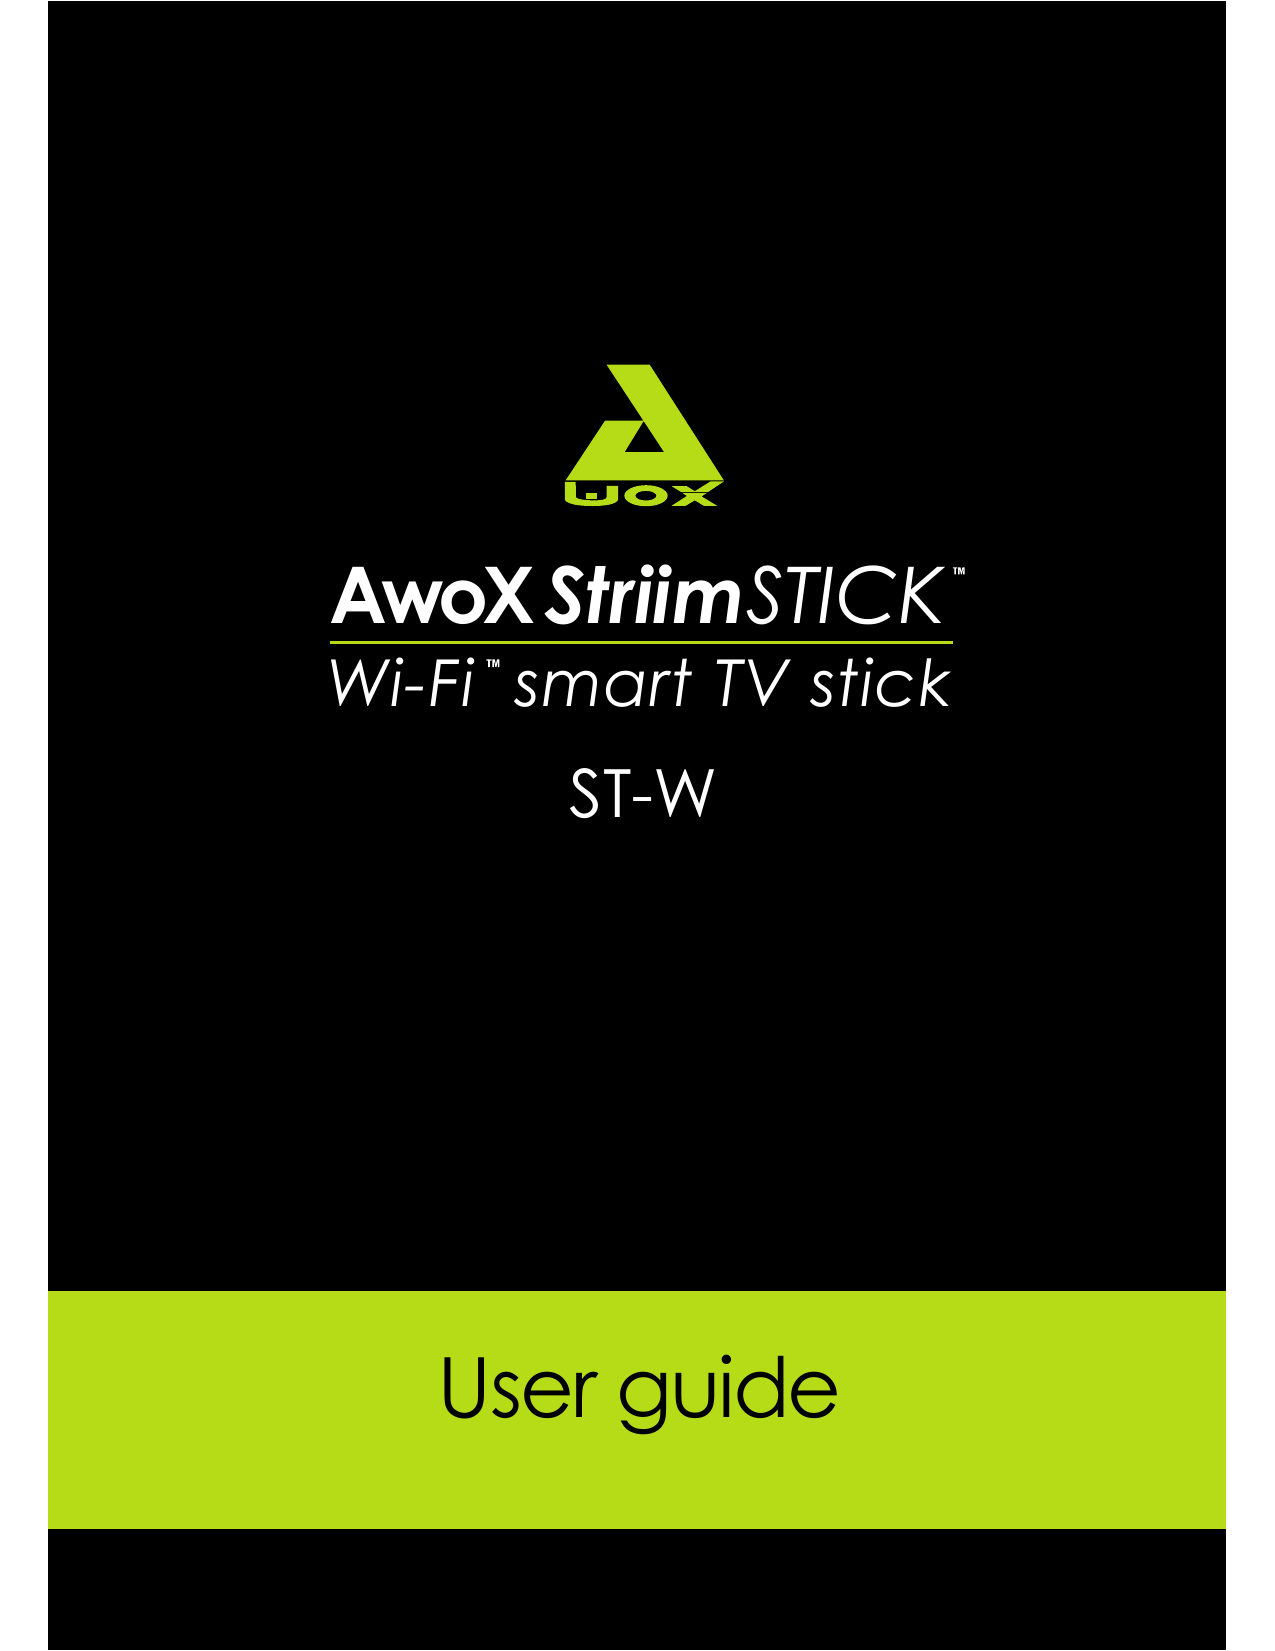 AWOX StriimLINK - Wi-Fi home stereo streaming adapter